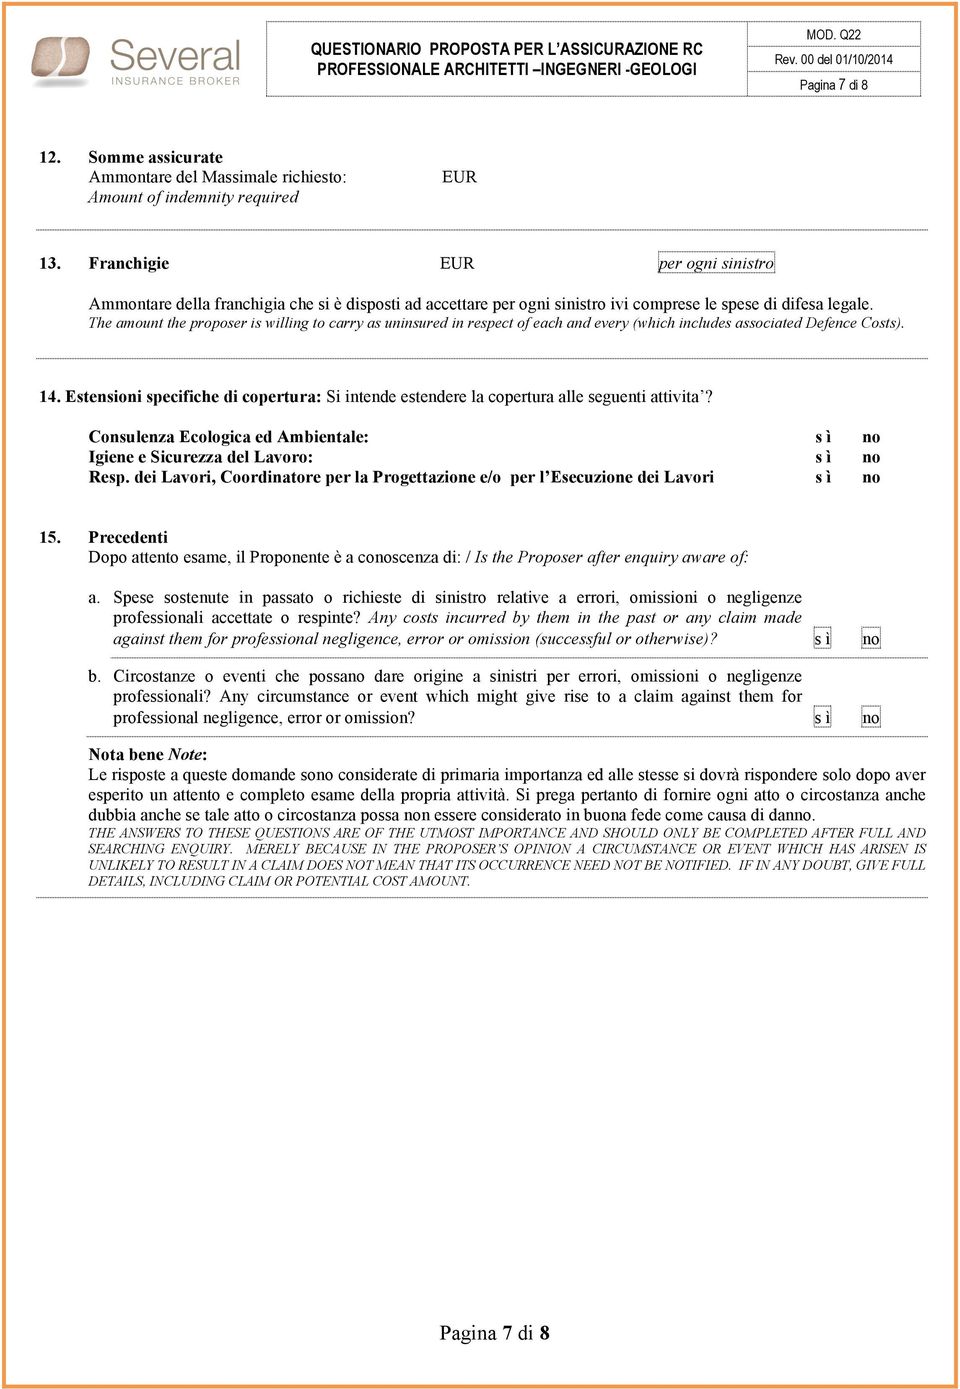 sinistro ivi comprese le spese di difesa legale. The amount the proposer is willing to carry as uninsured in respect of each and every (which includes associated Defence Costs). 14.